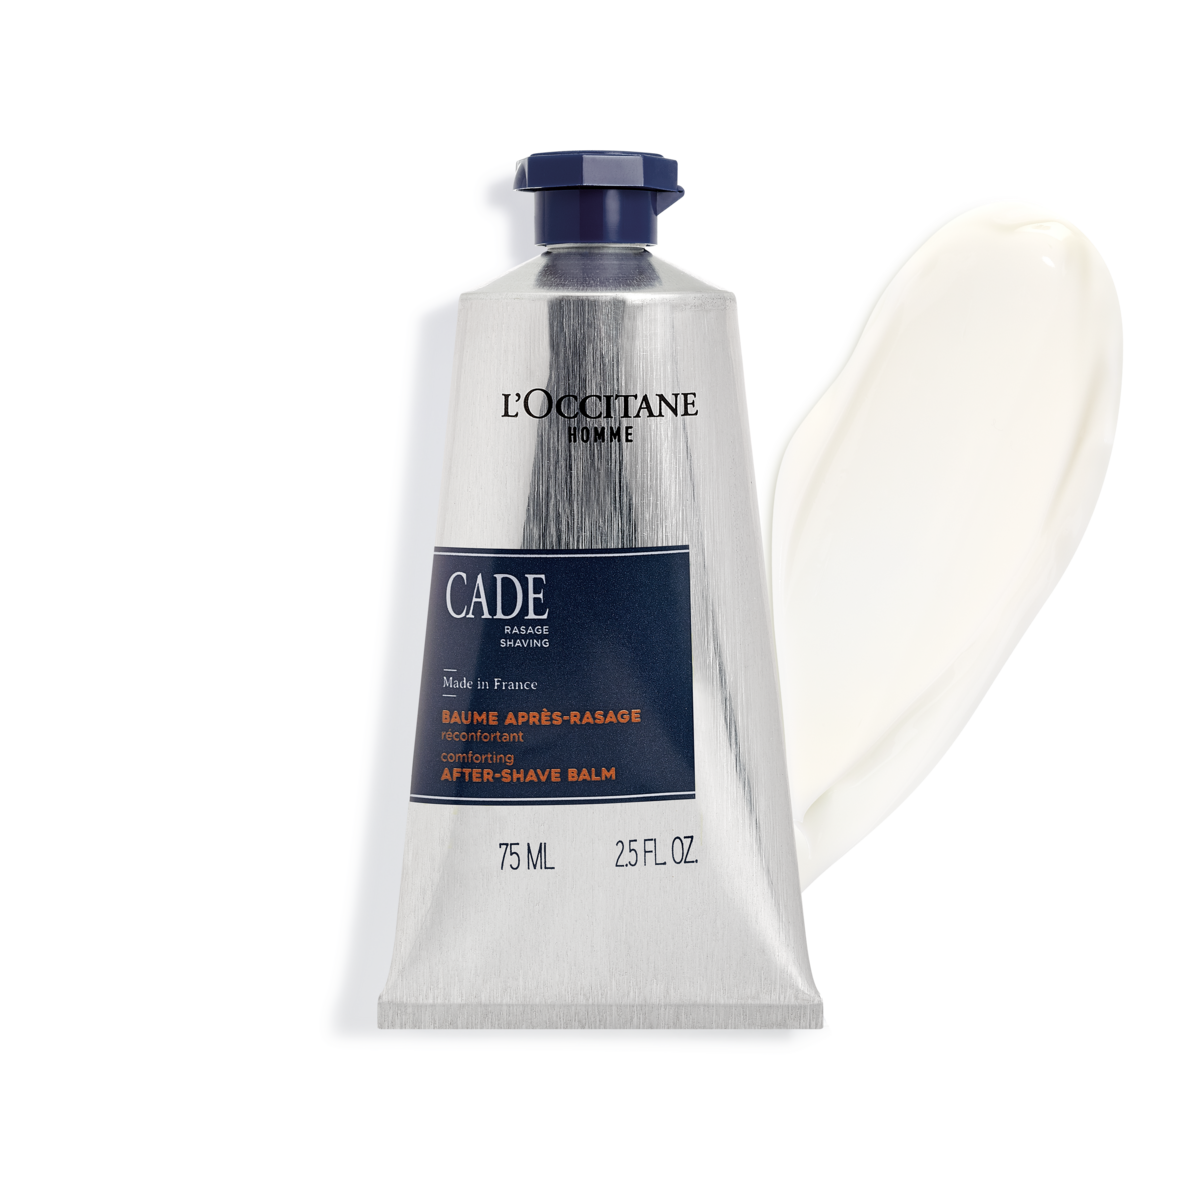 Cade After-Shave Balm